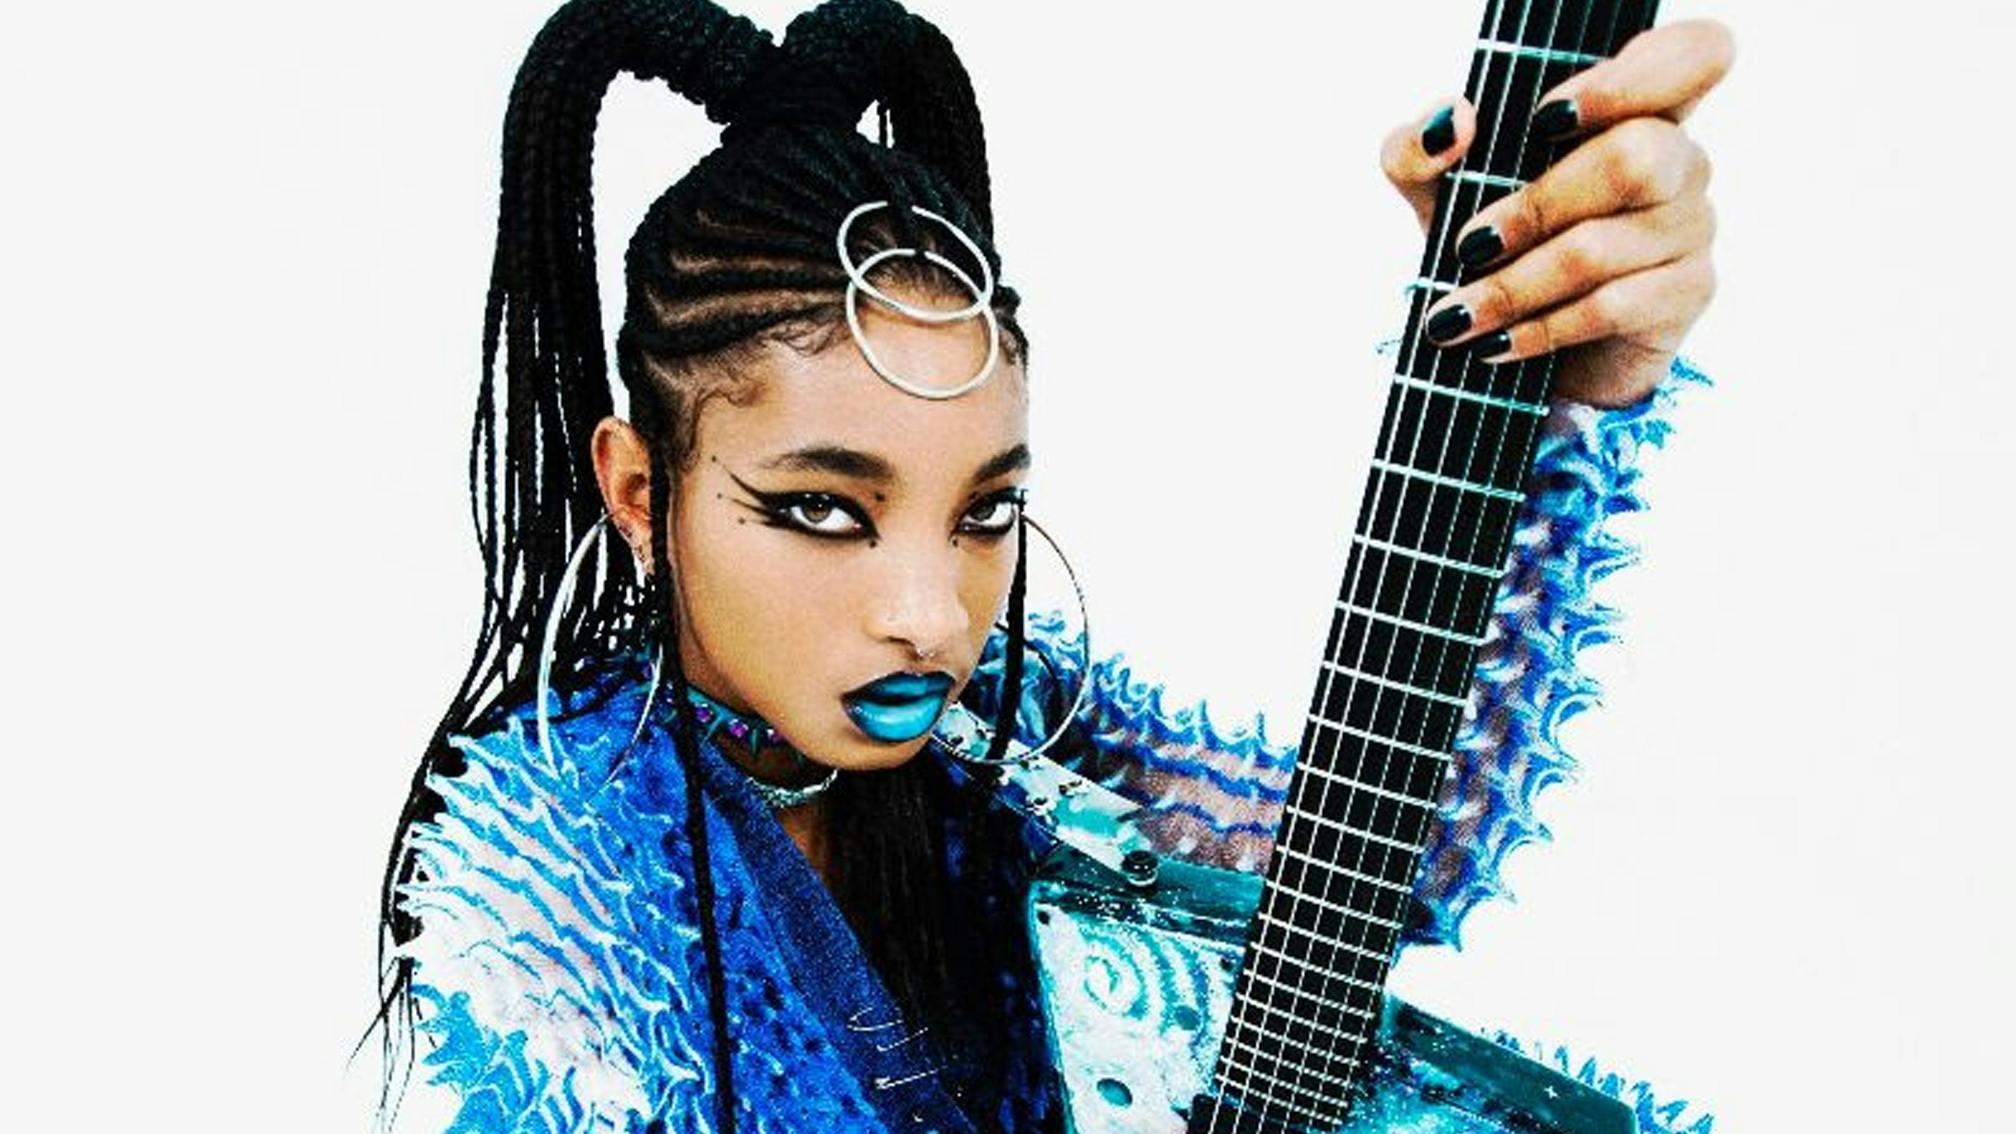 Willow Smith: "I used to get bullied in school for listening to Paramore and My Chemical Romance"